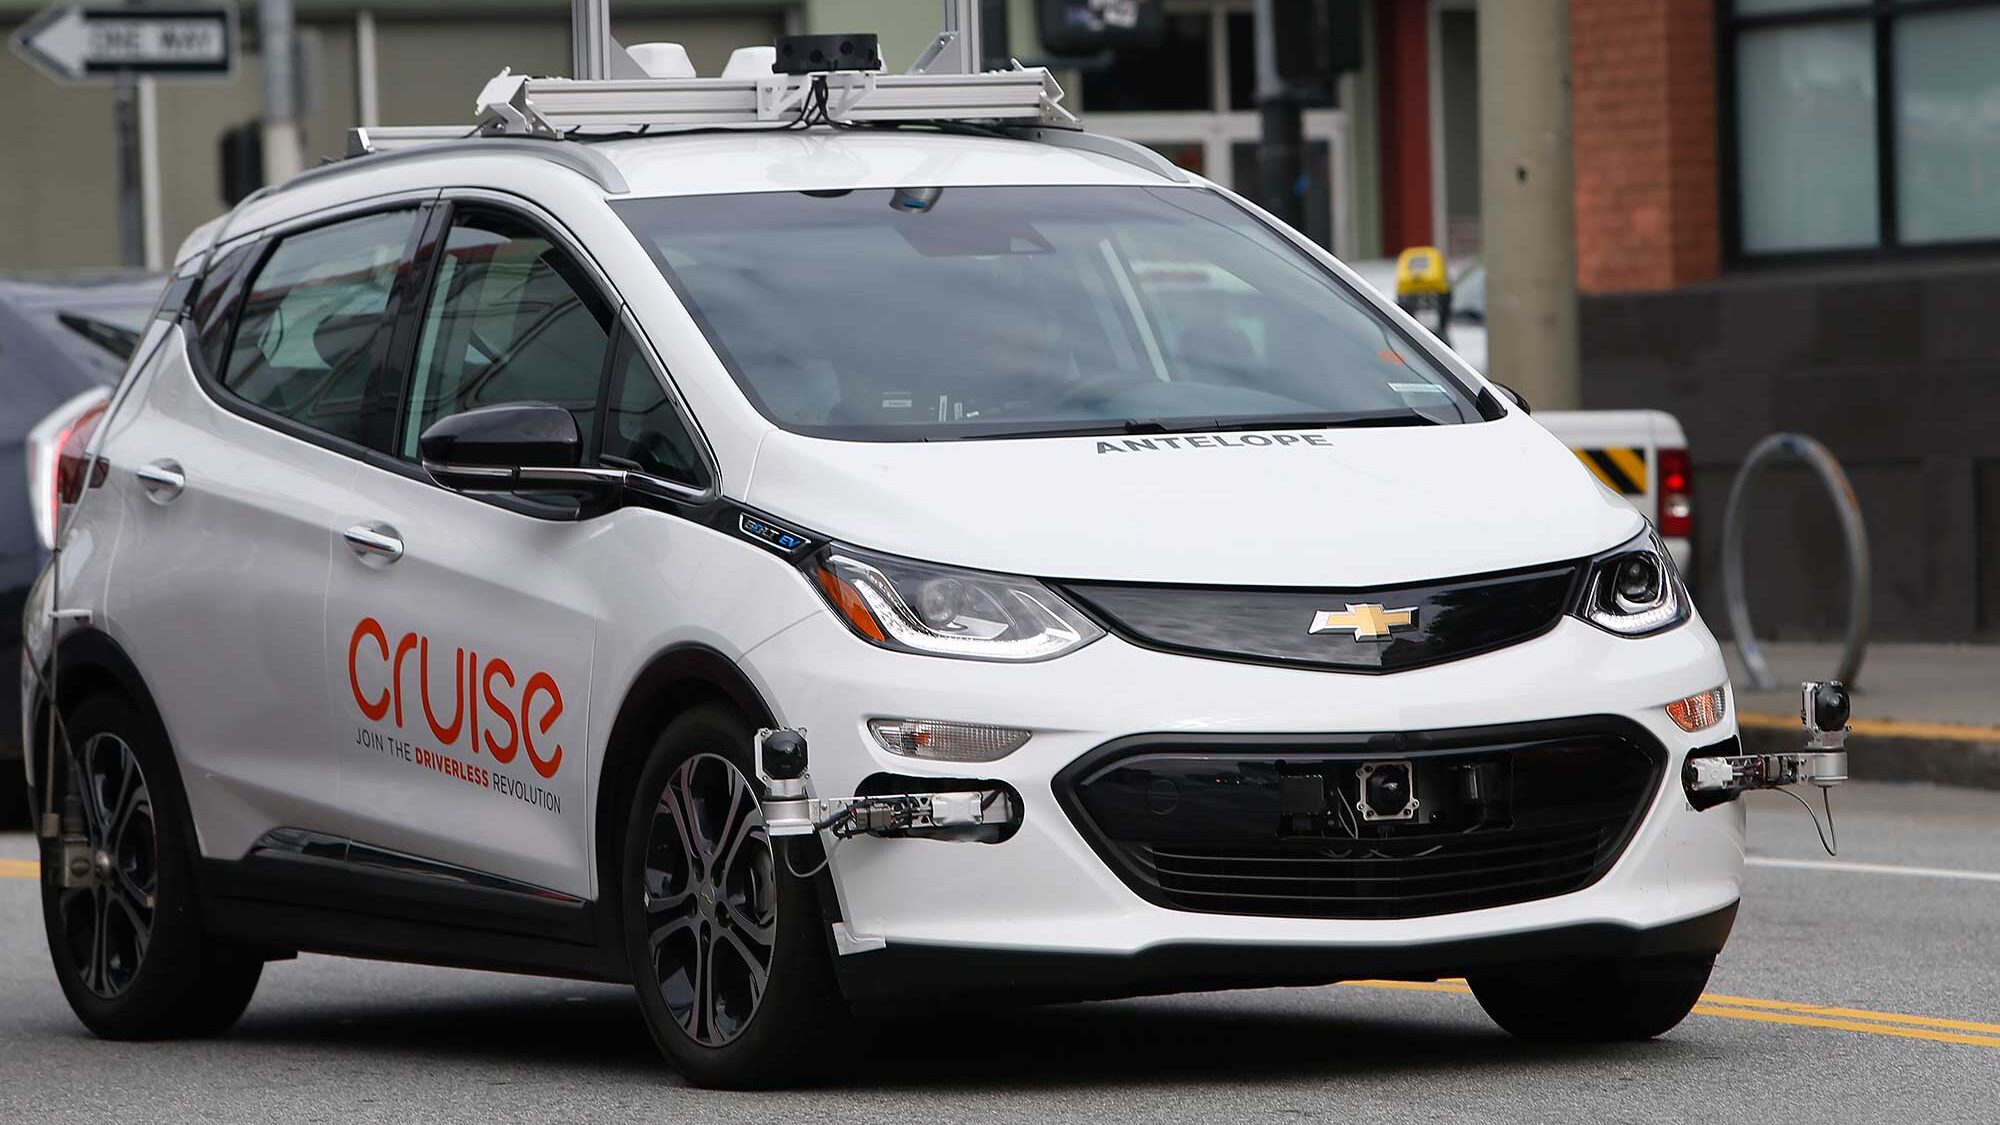 Cruise’s self-driving taxis are causing chaos in San Francisco